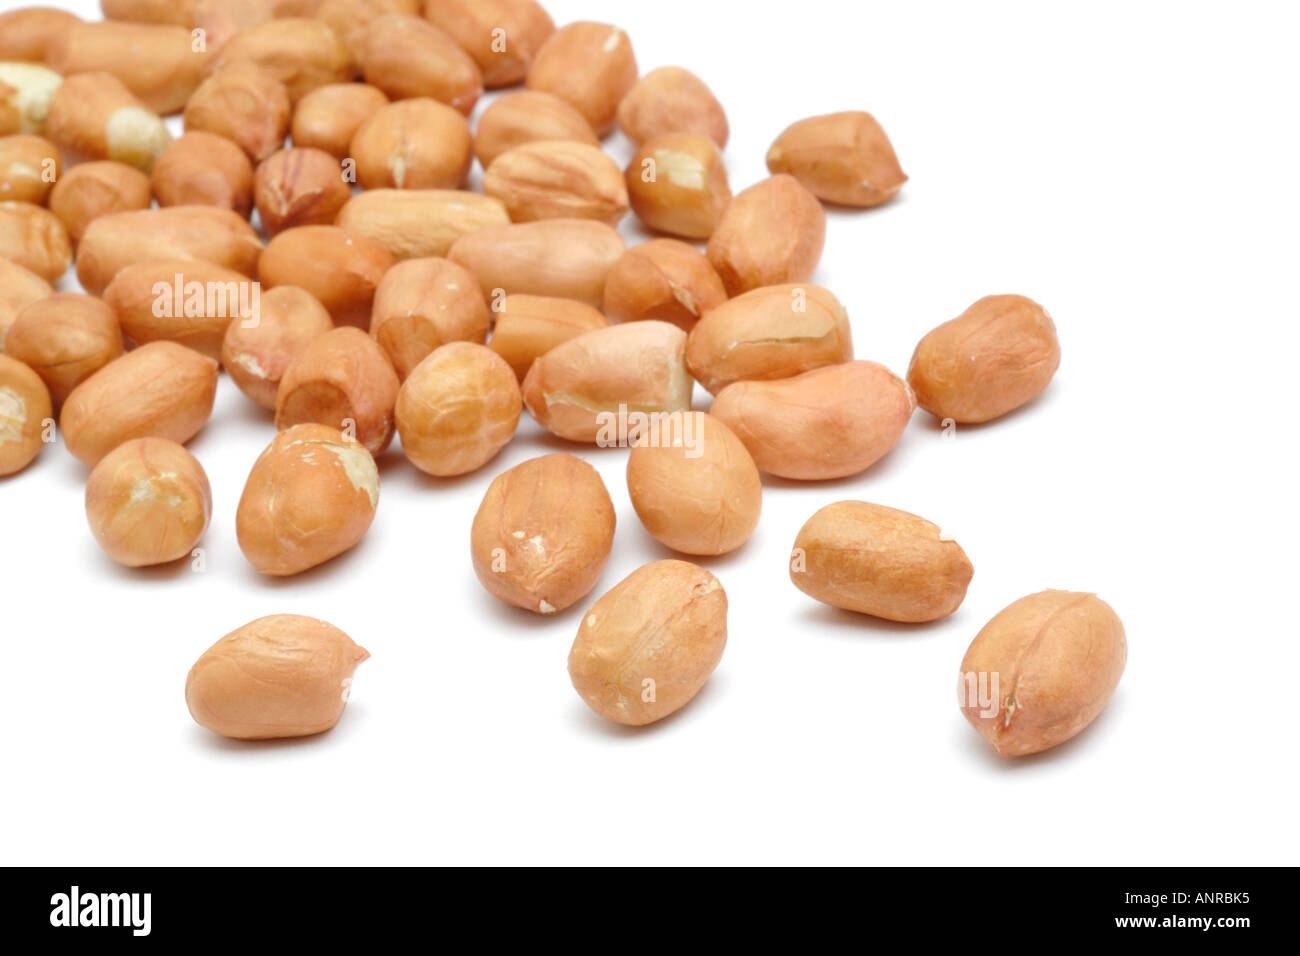 pale-skin-peanuts-on-white-background-AN